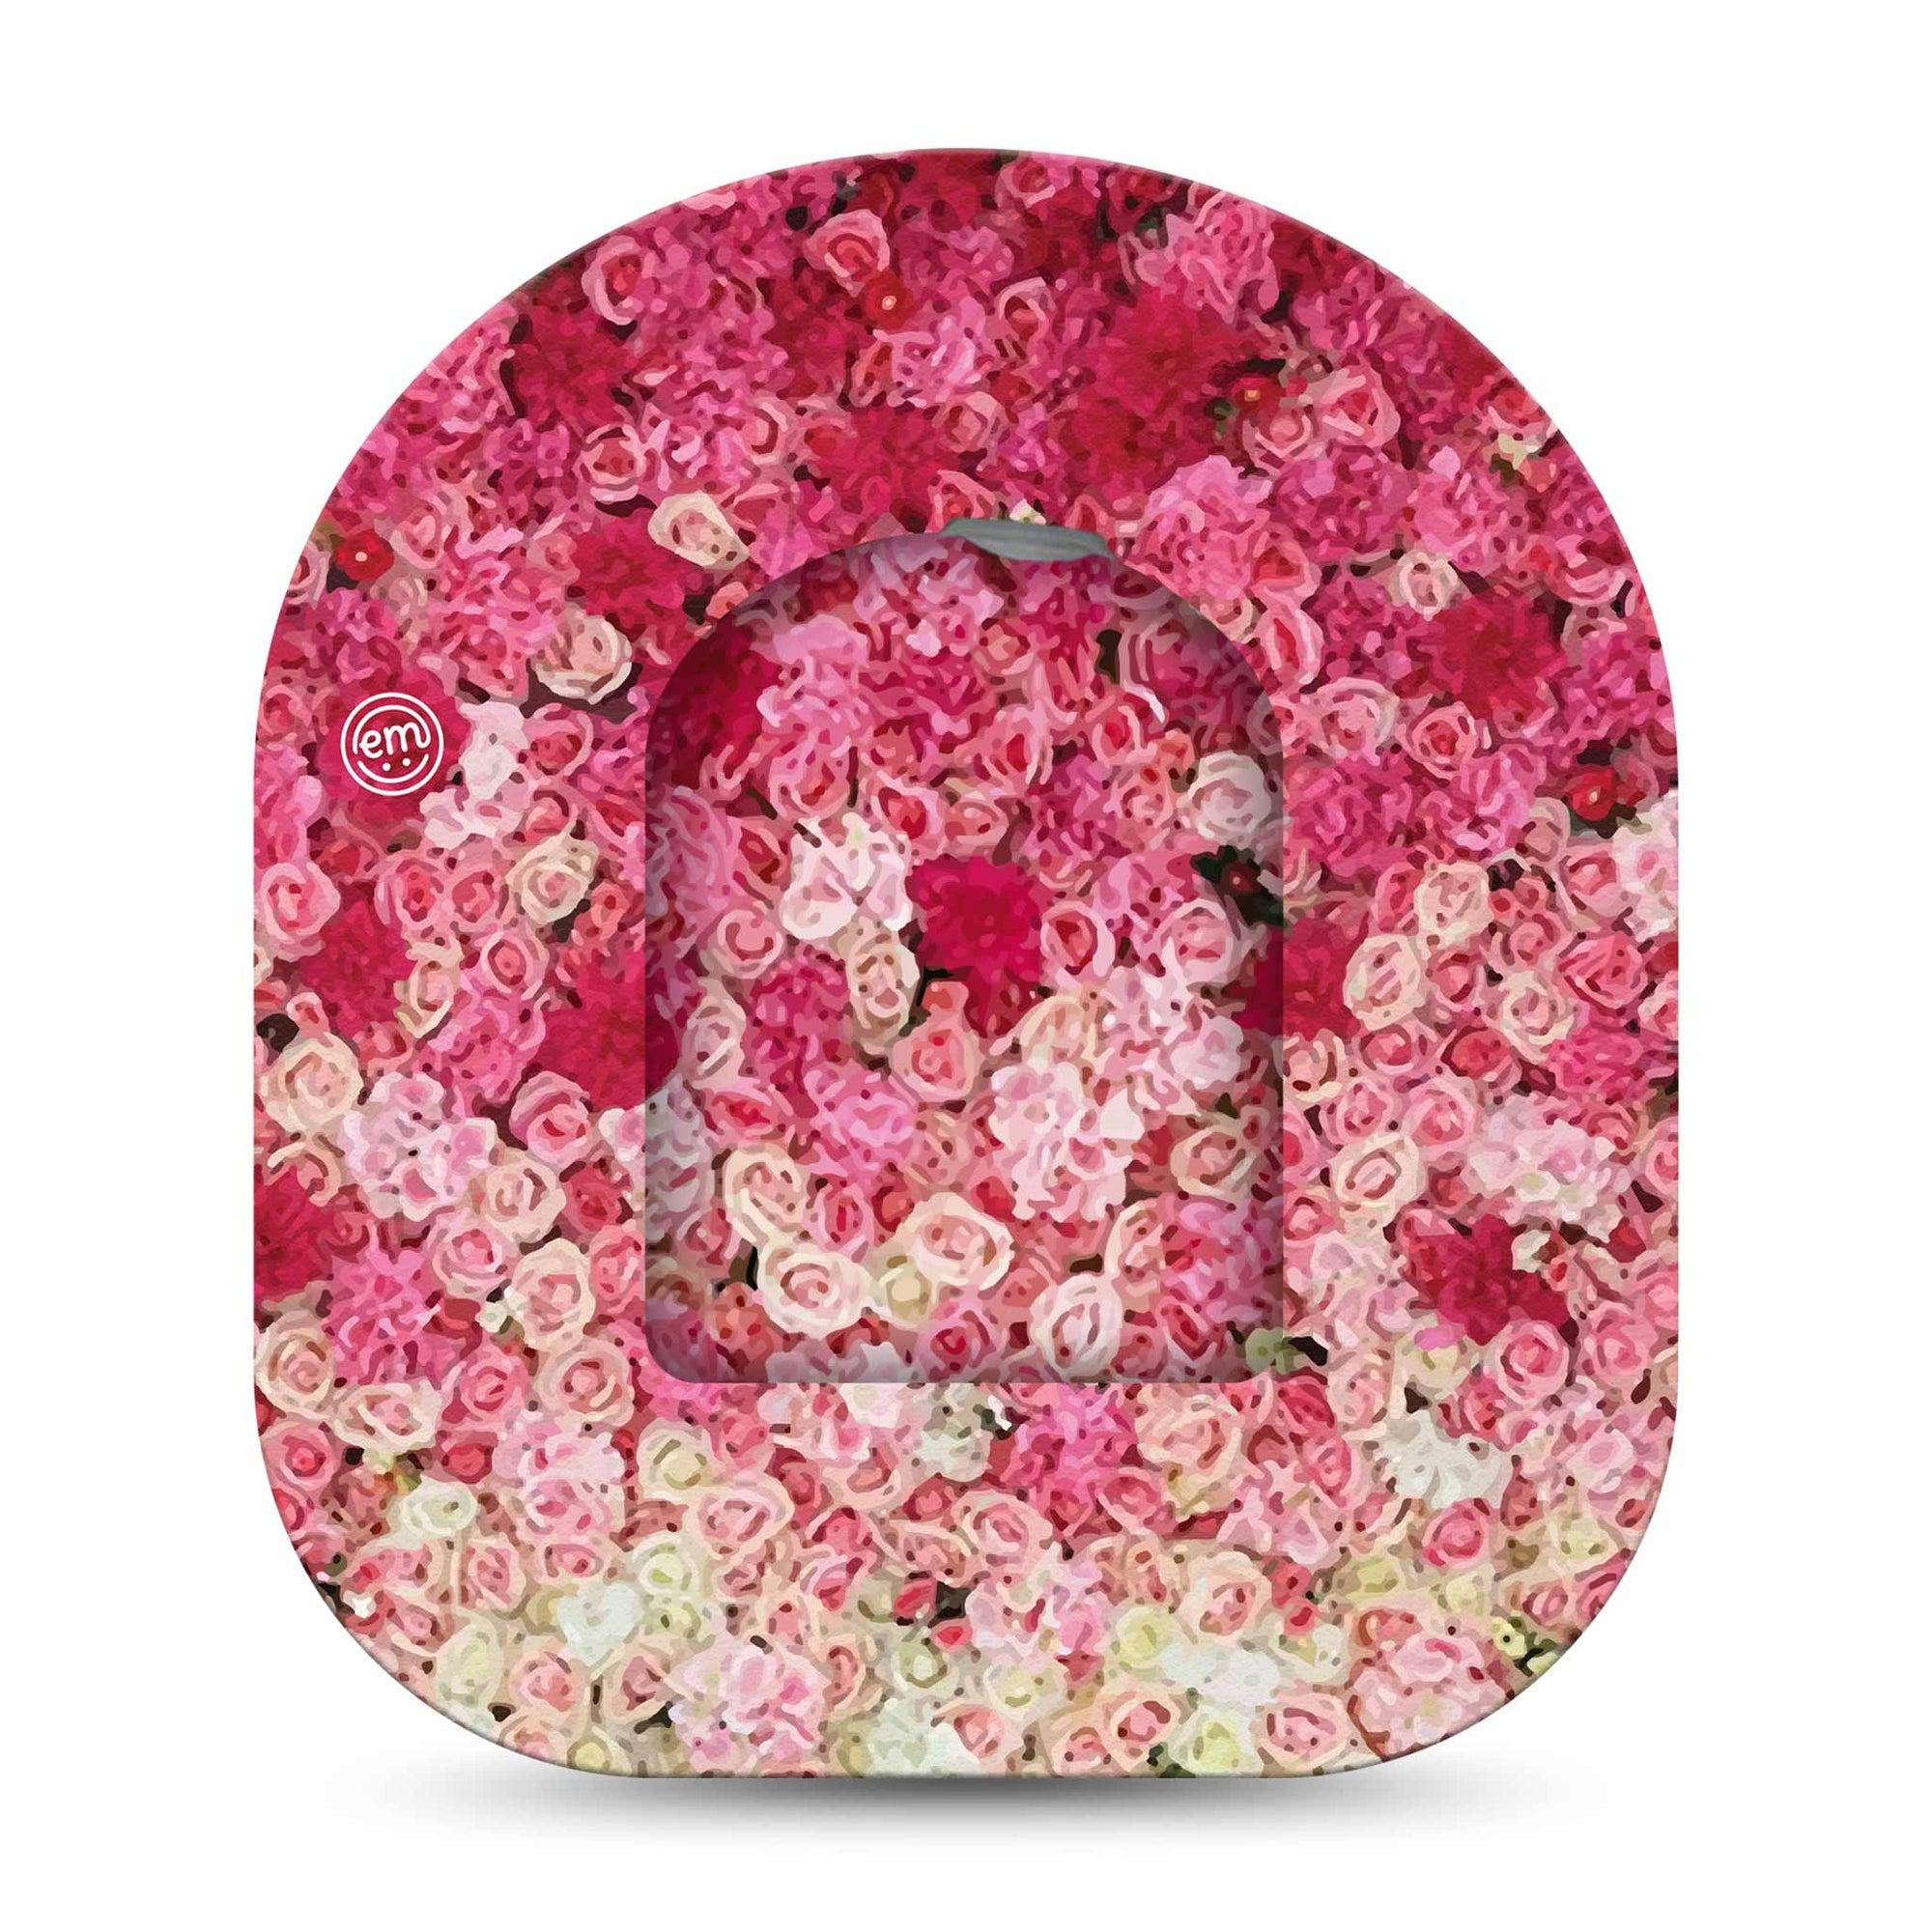 ExpressionMed Flower Wall Omnipod Full Wrap Center Sticker and Pod Tape Pink Variety Pink Roses Vinyl Sticker and Tape Design Pump Design